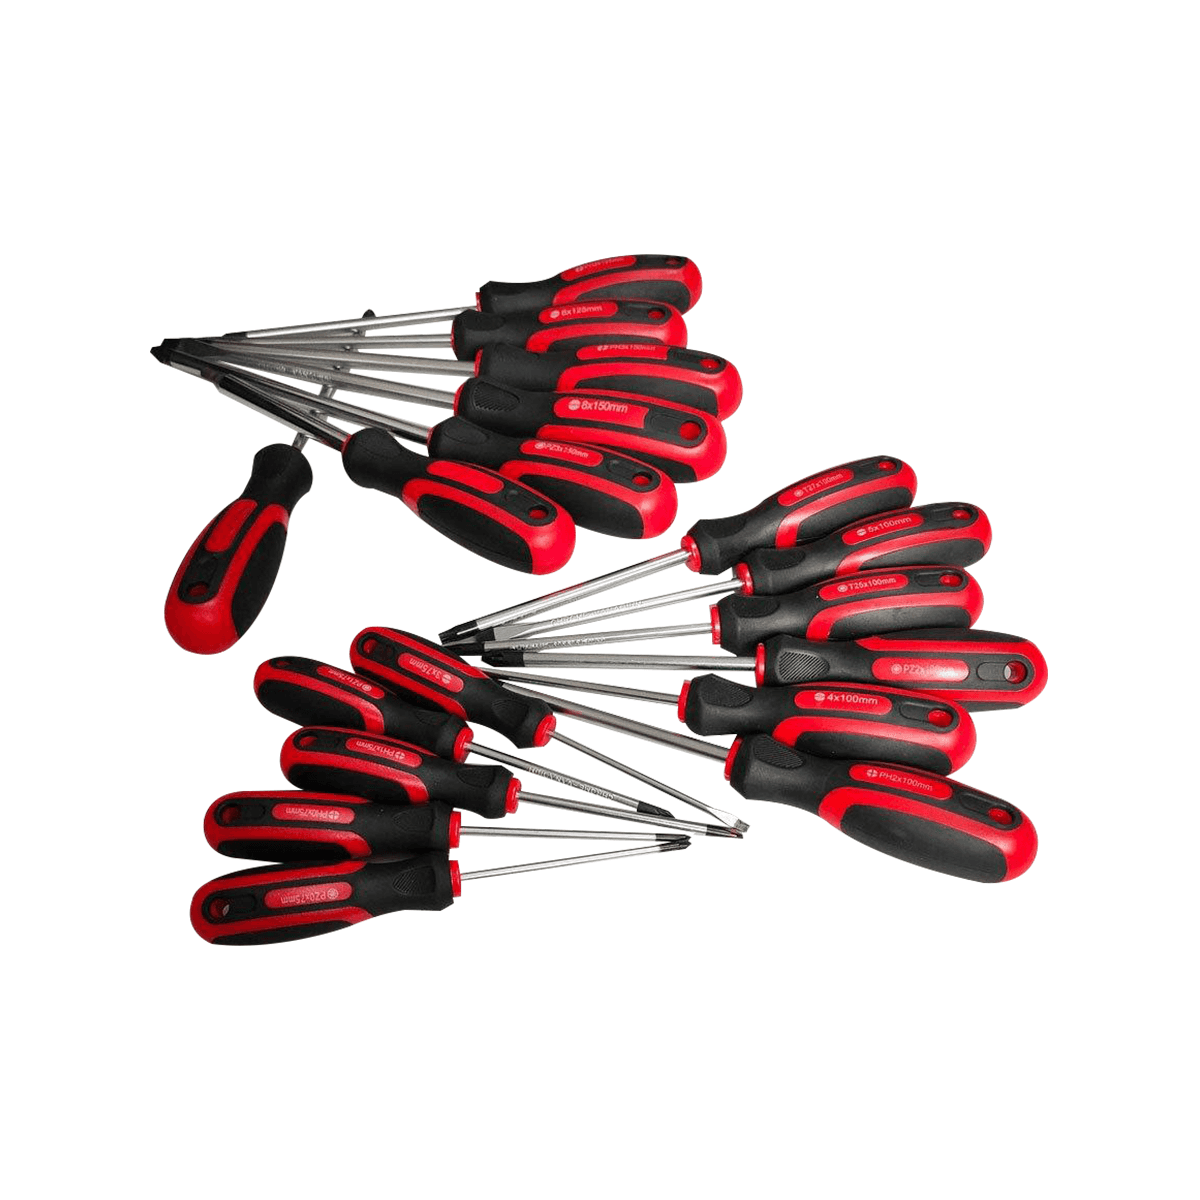 44pcs Cr-v Carbon Steel Profesional Multifunction Magnetic Screwdriver Set with Hexagon Wrench set and Bits